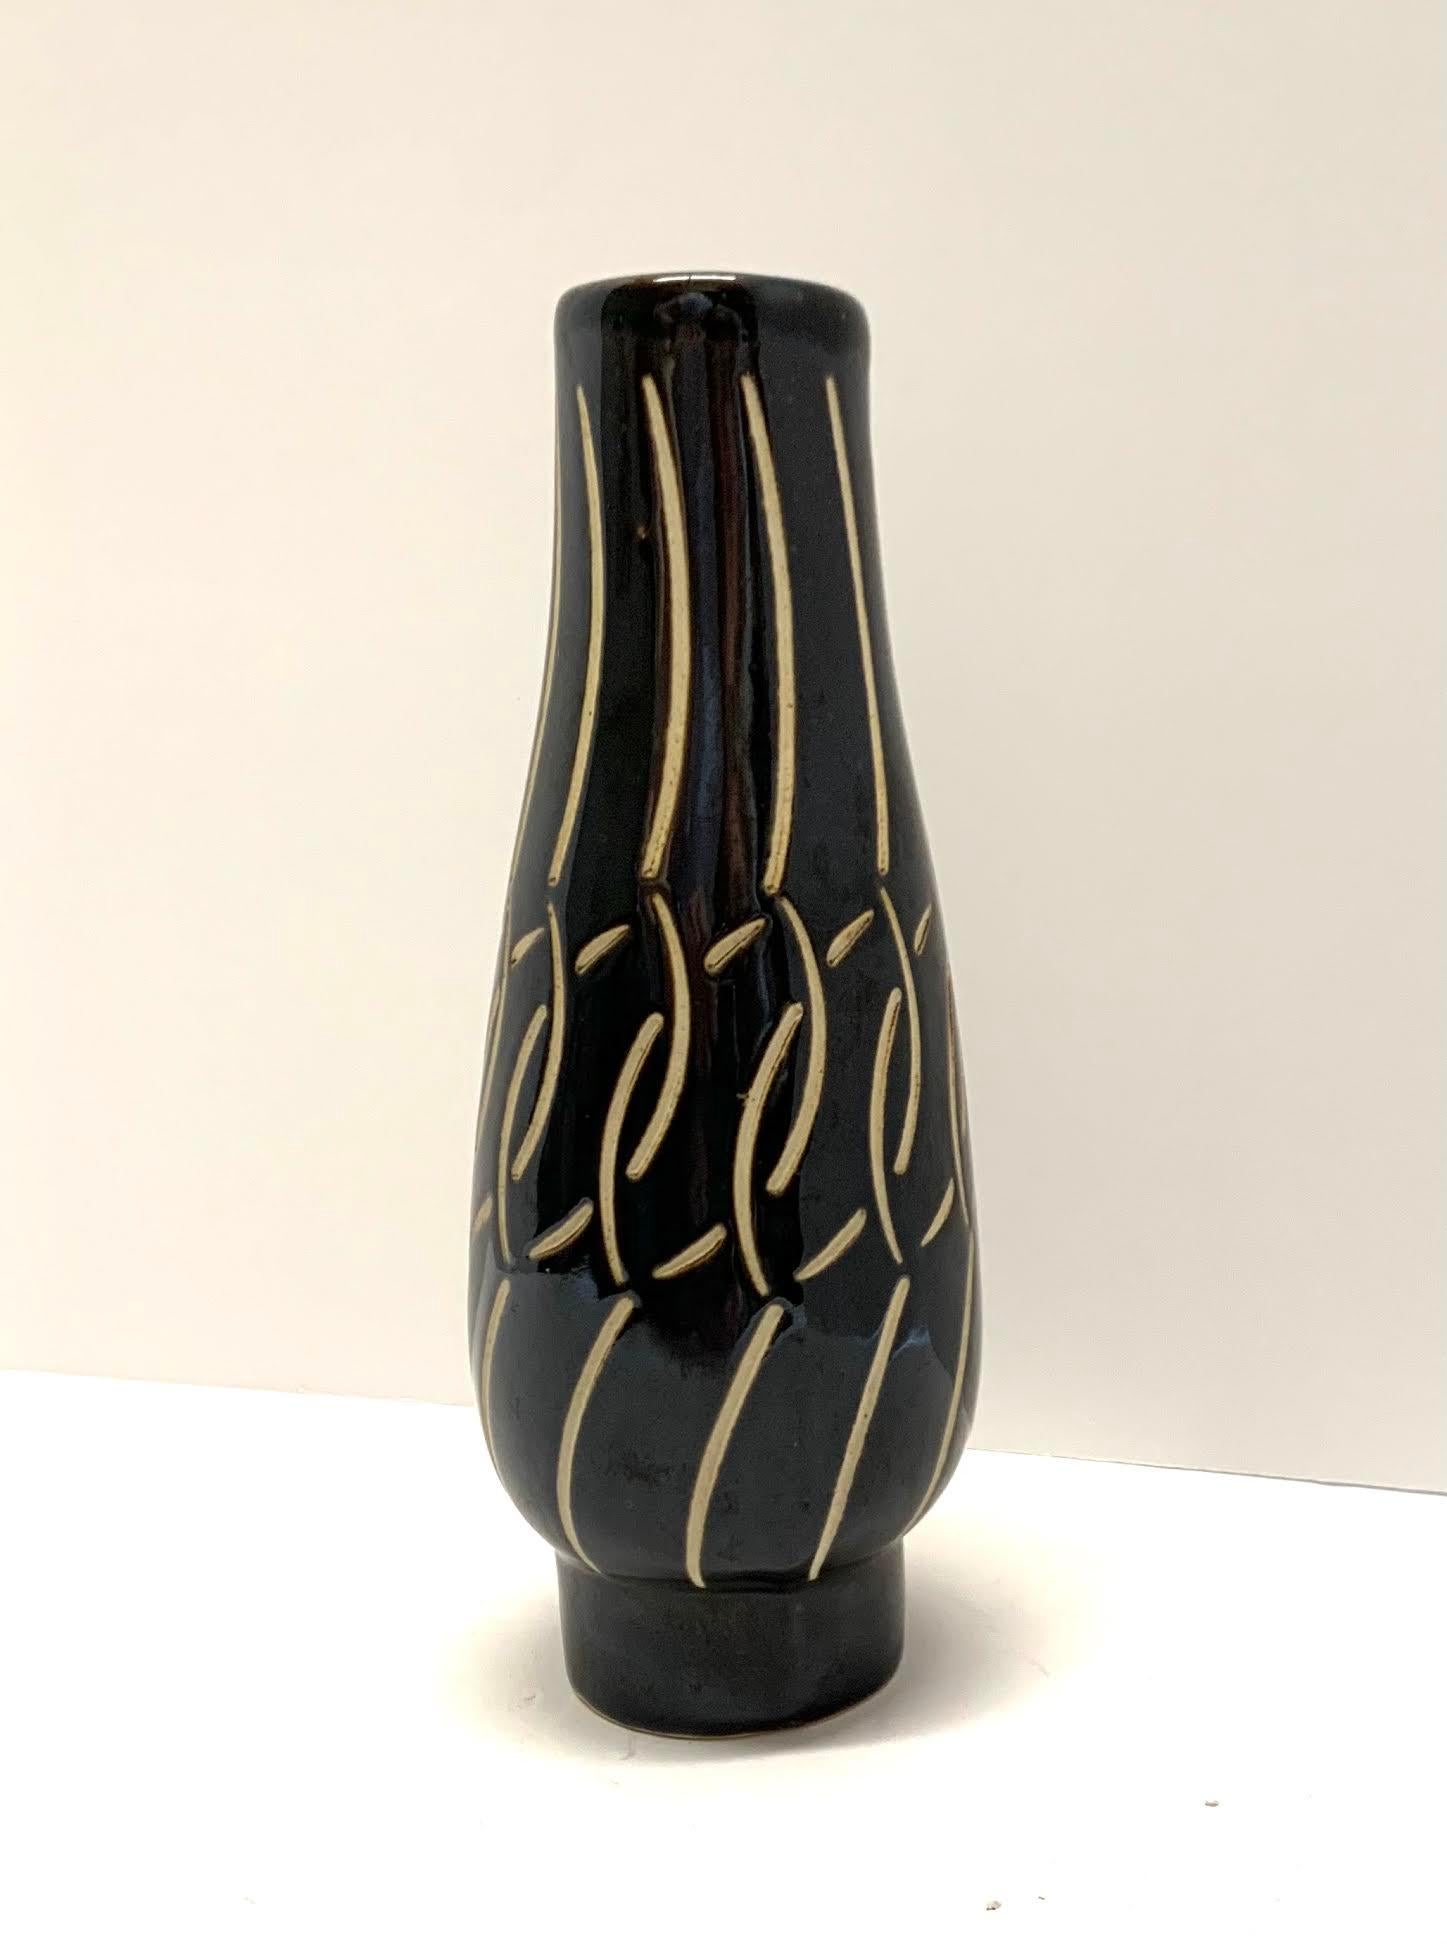 Mid century East German vase
Black and cream decorative design
Part of a large collection.